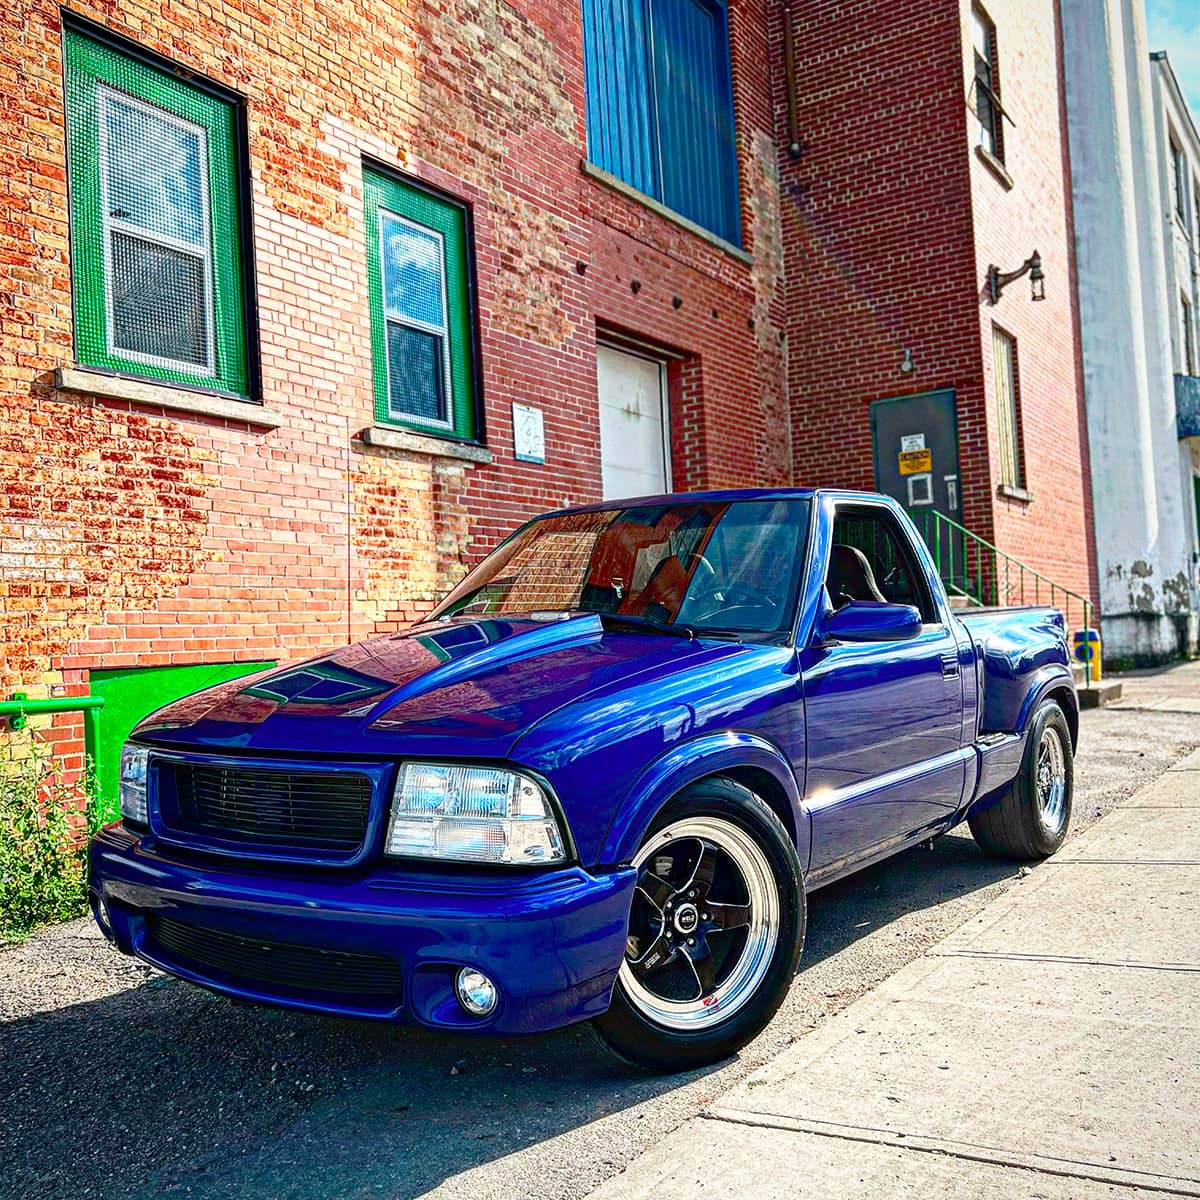 GMC Sonoma/Chevy S10 with a cowl hood and supercharger